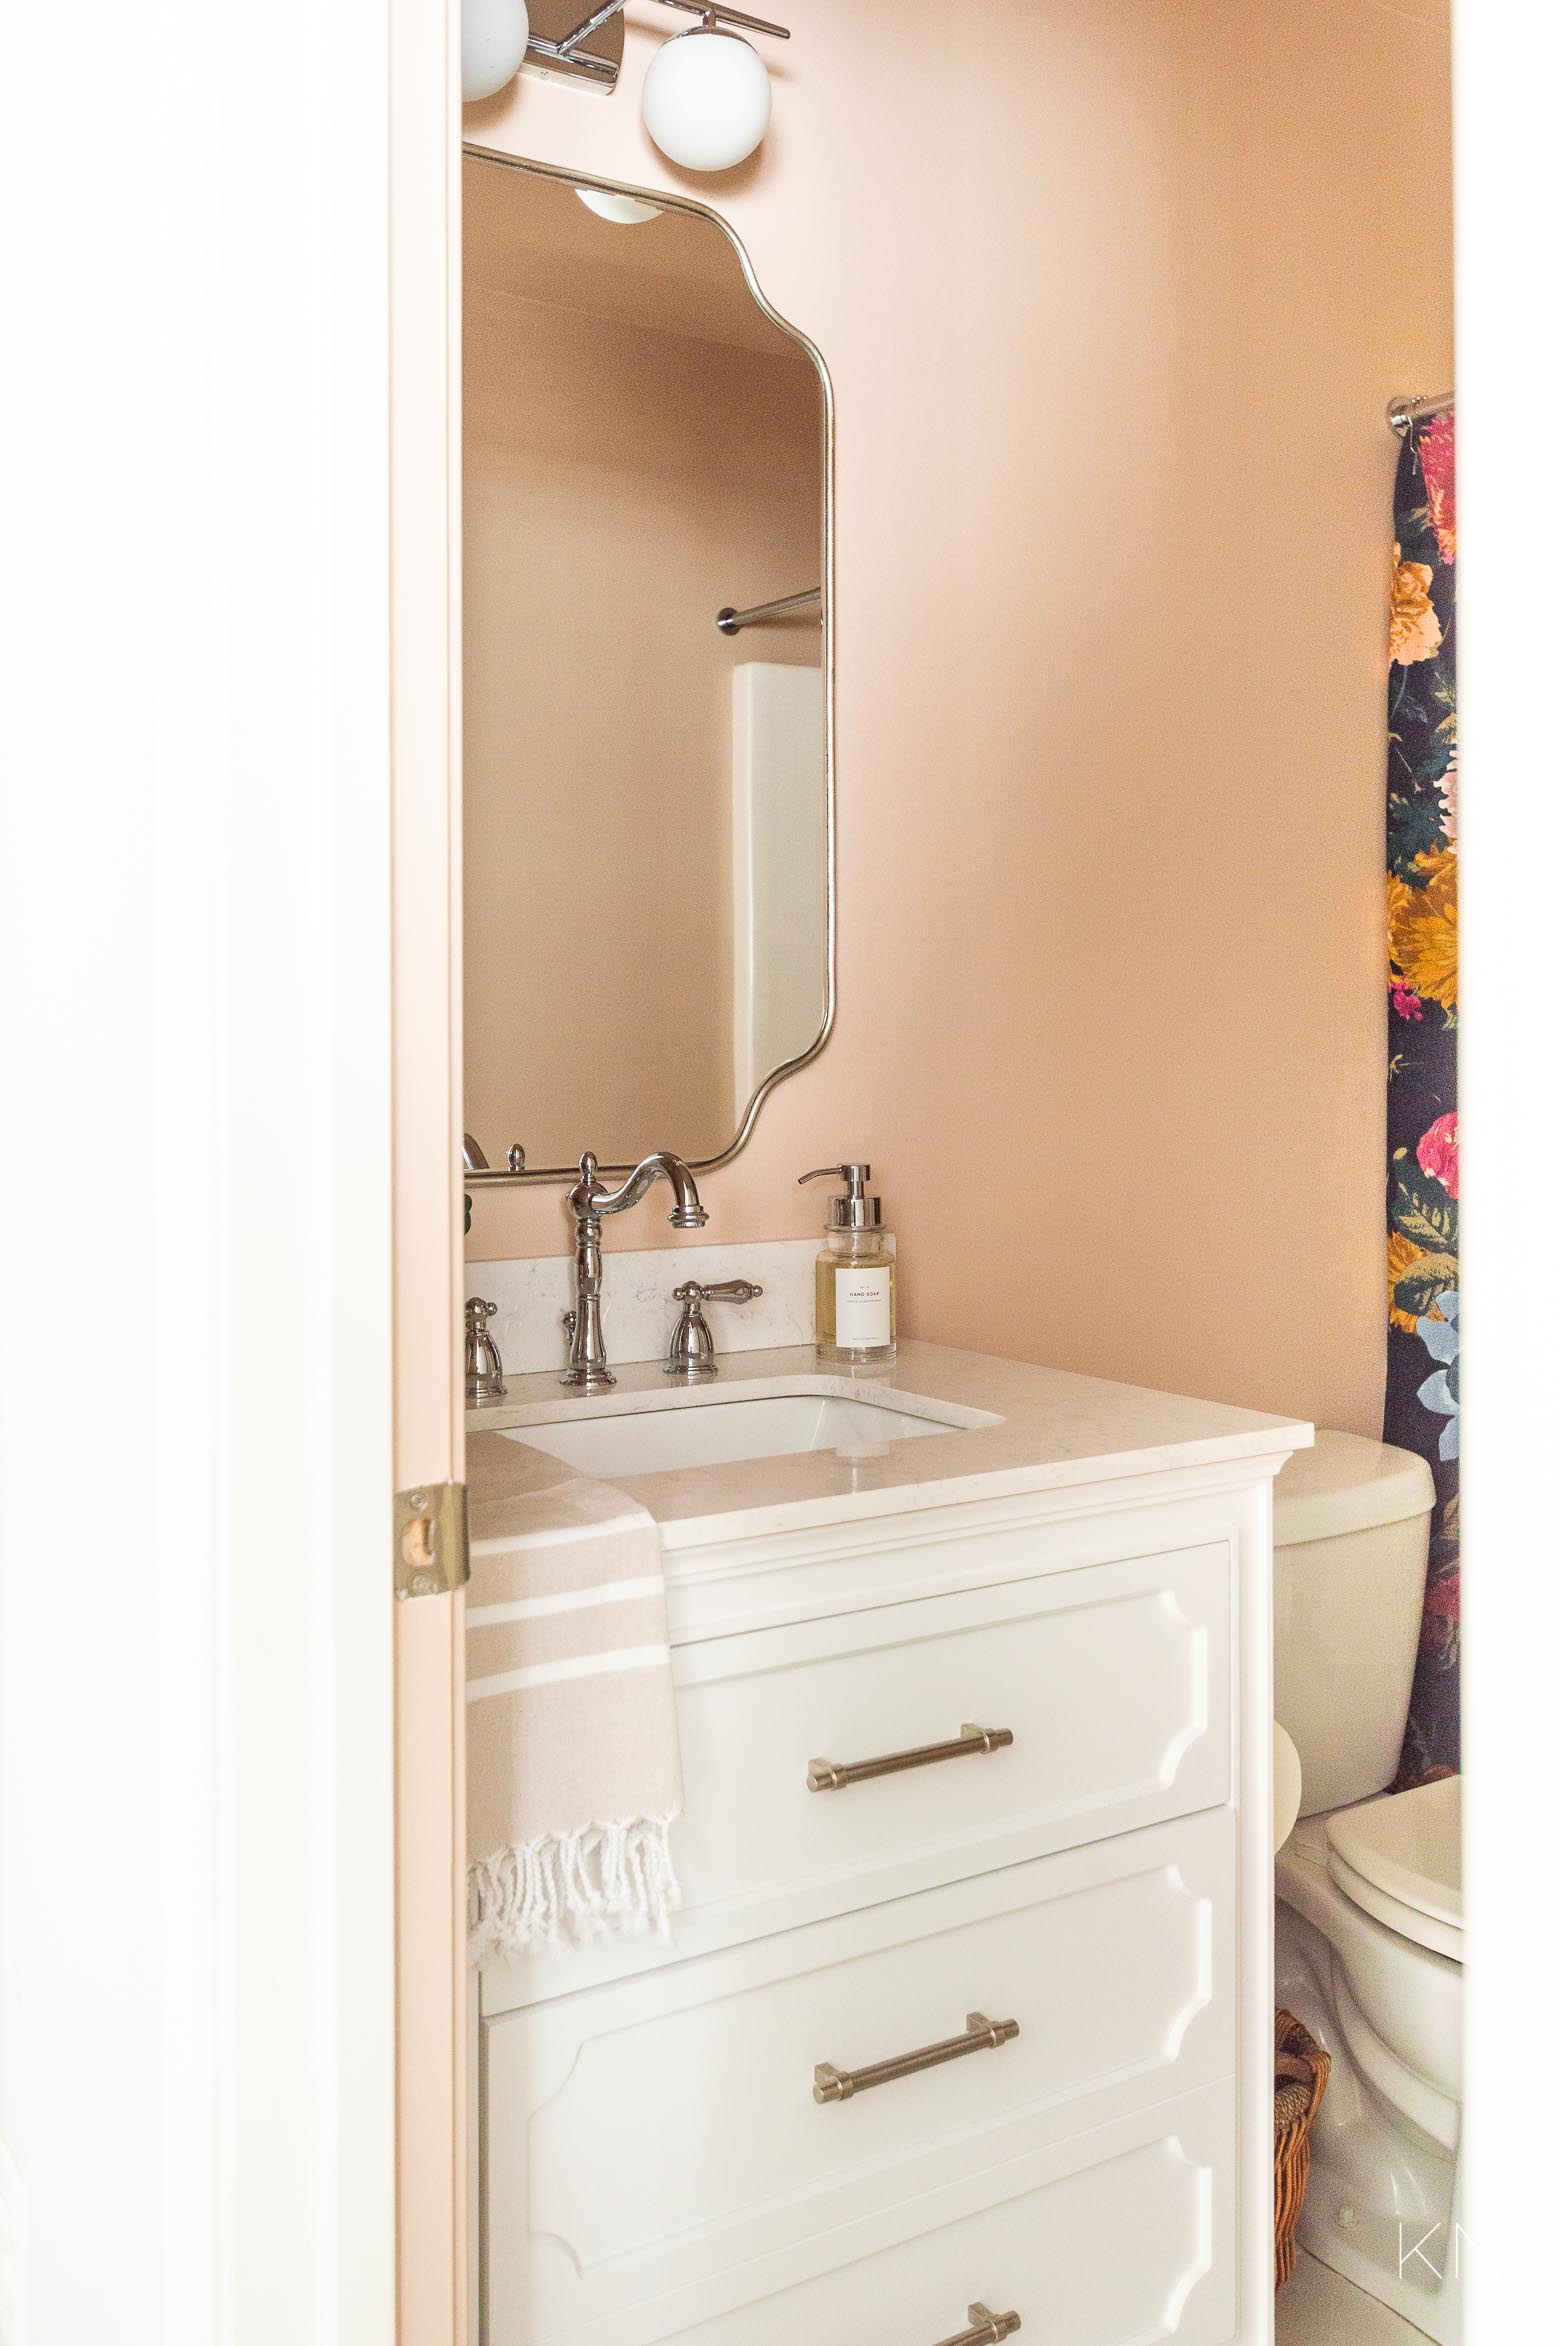 Small Pink Bathroom Makeover Reveal for a Guest Bathroom or Office Bathroom